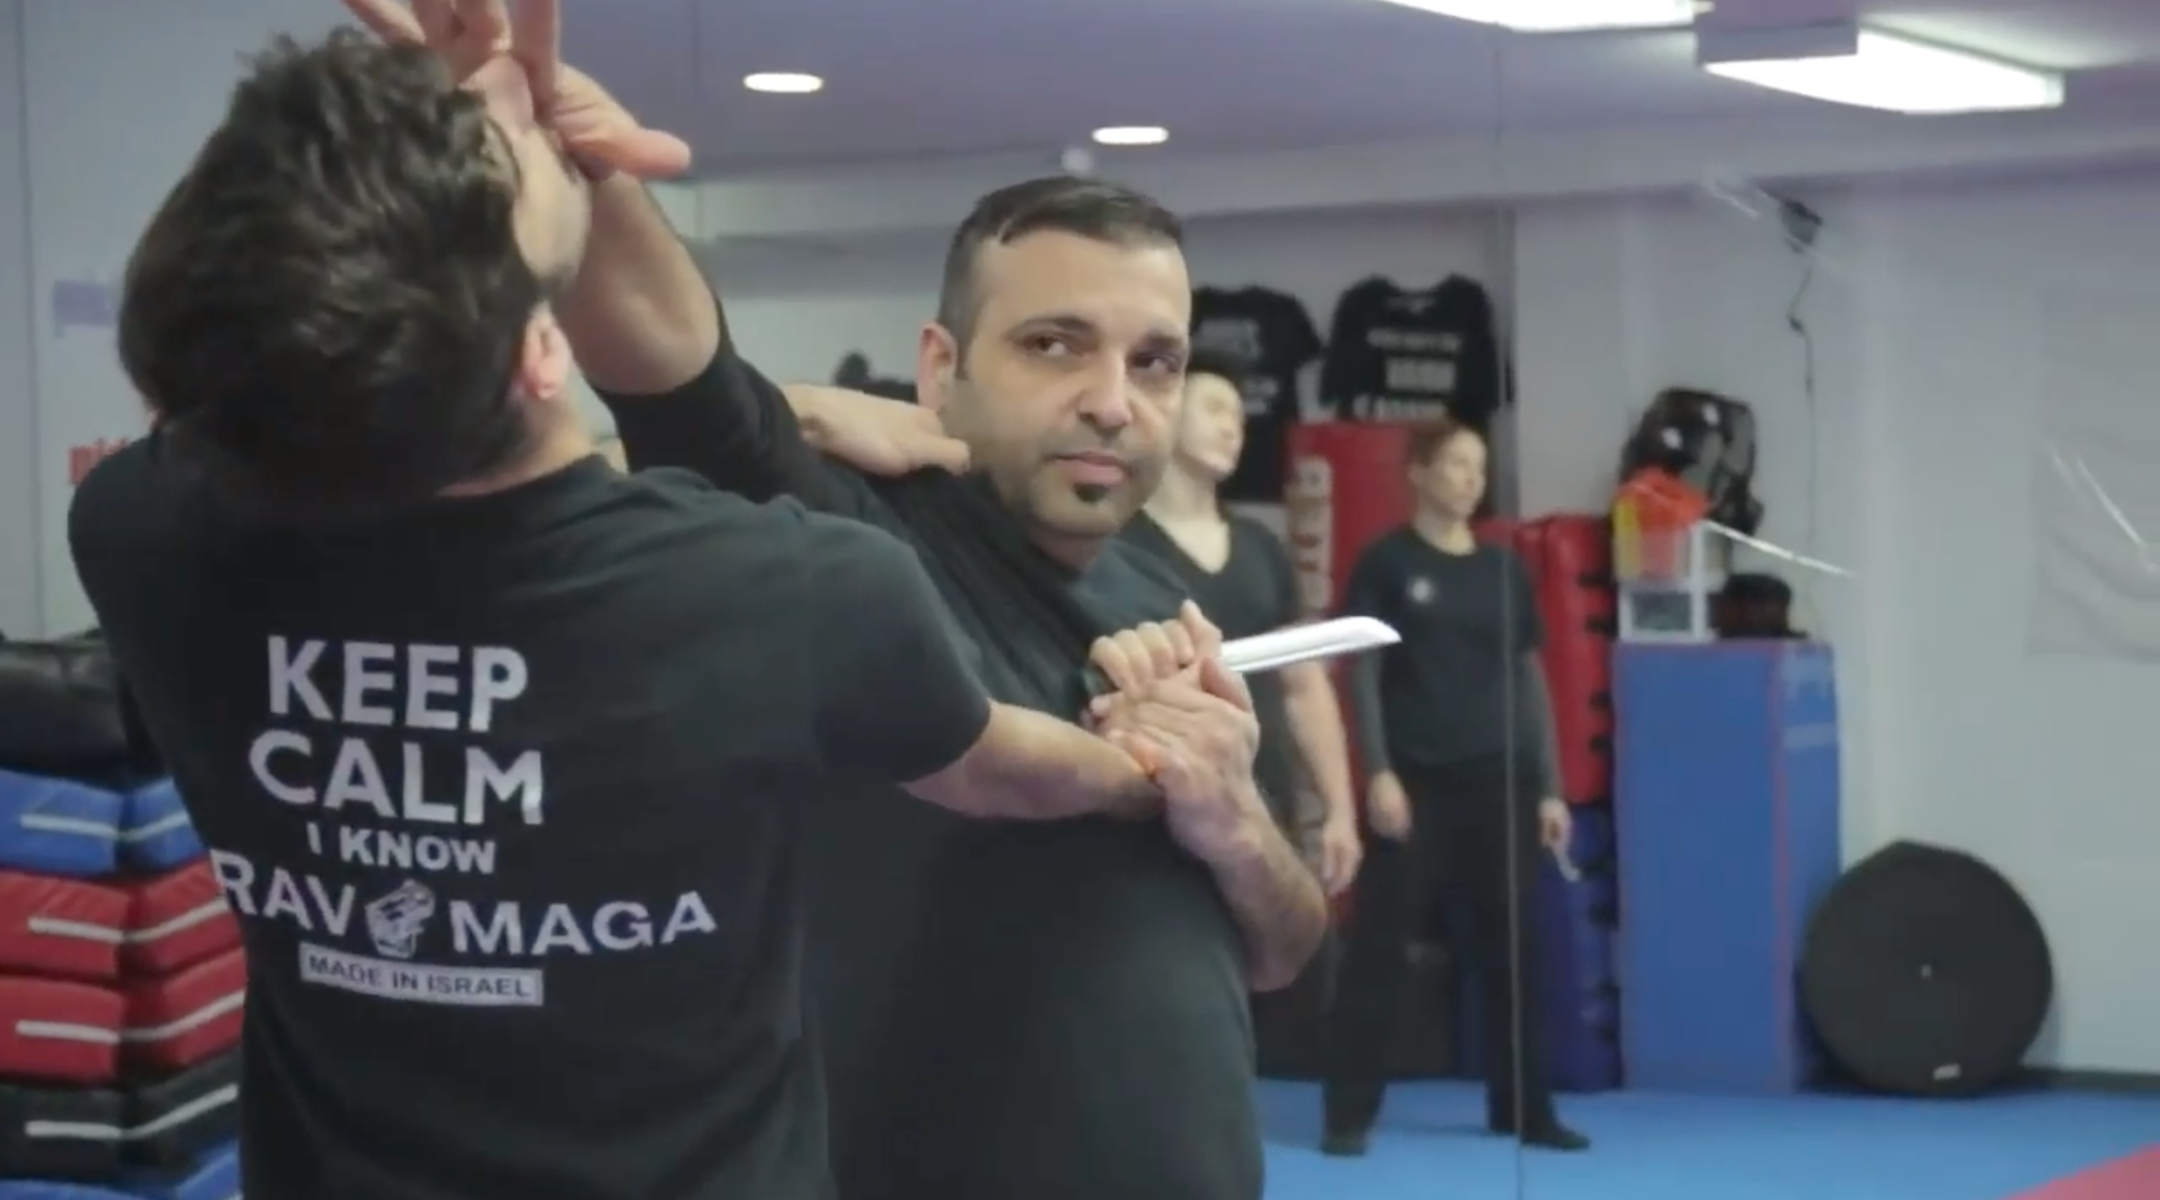 Avi Abraham, a krav maga instructor who teaches self-defense classes to synagogue-goers, shows how to combat an attacker in a promotional video (Screenshot from YouTube)